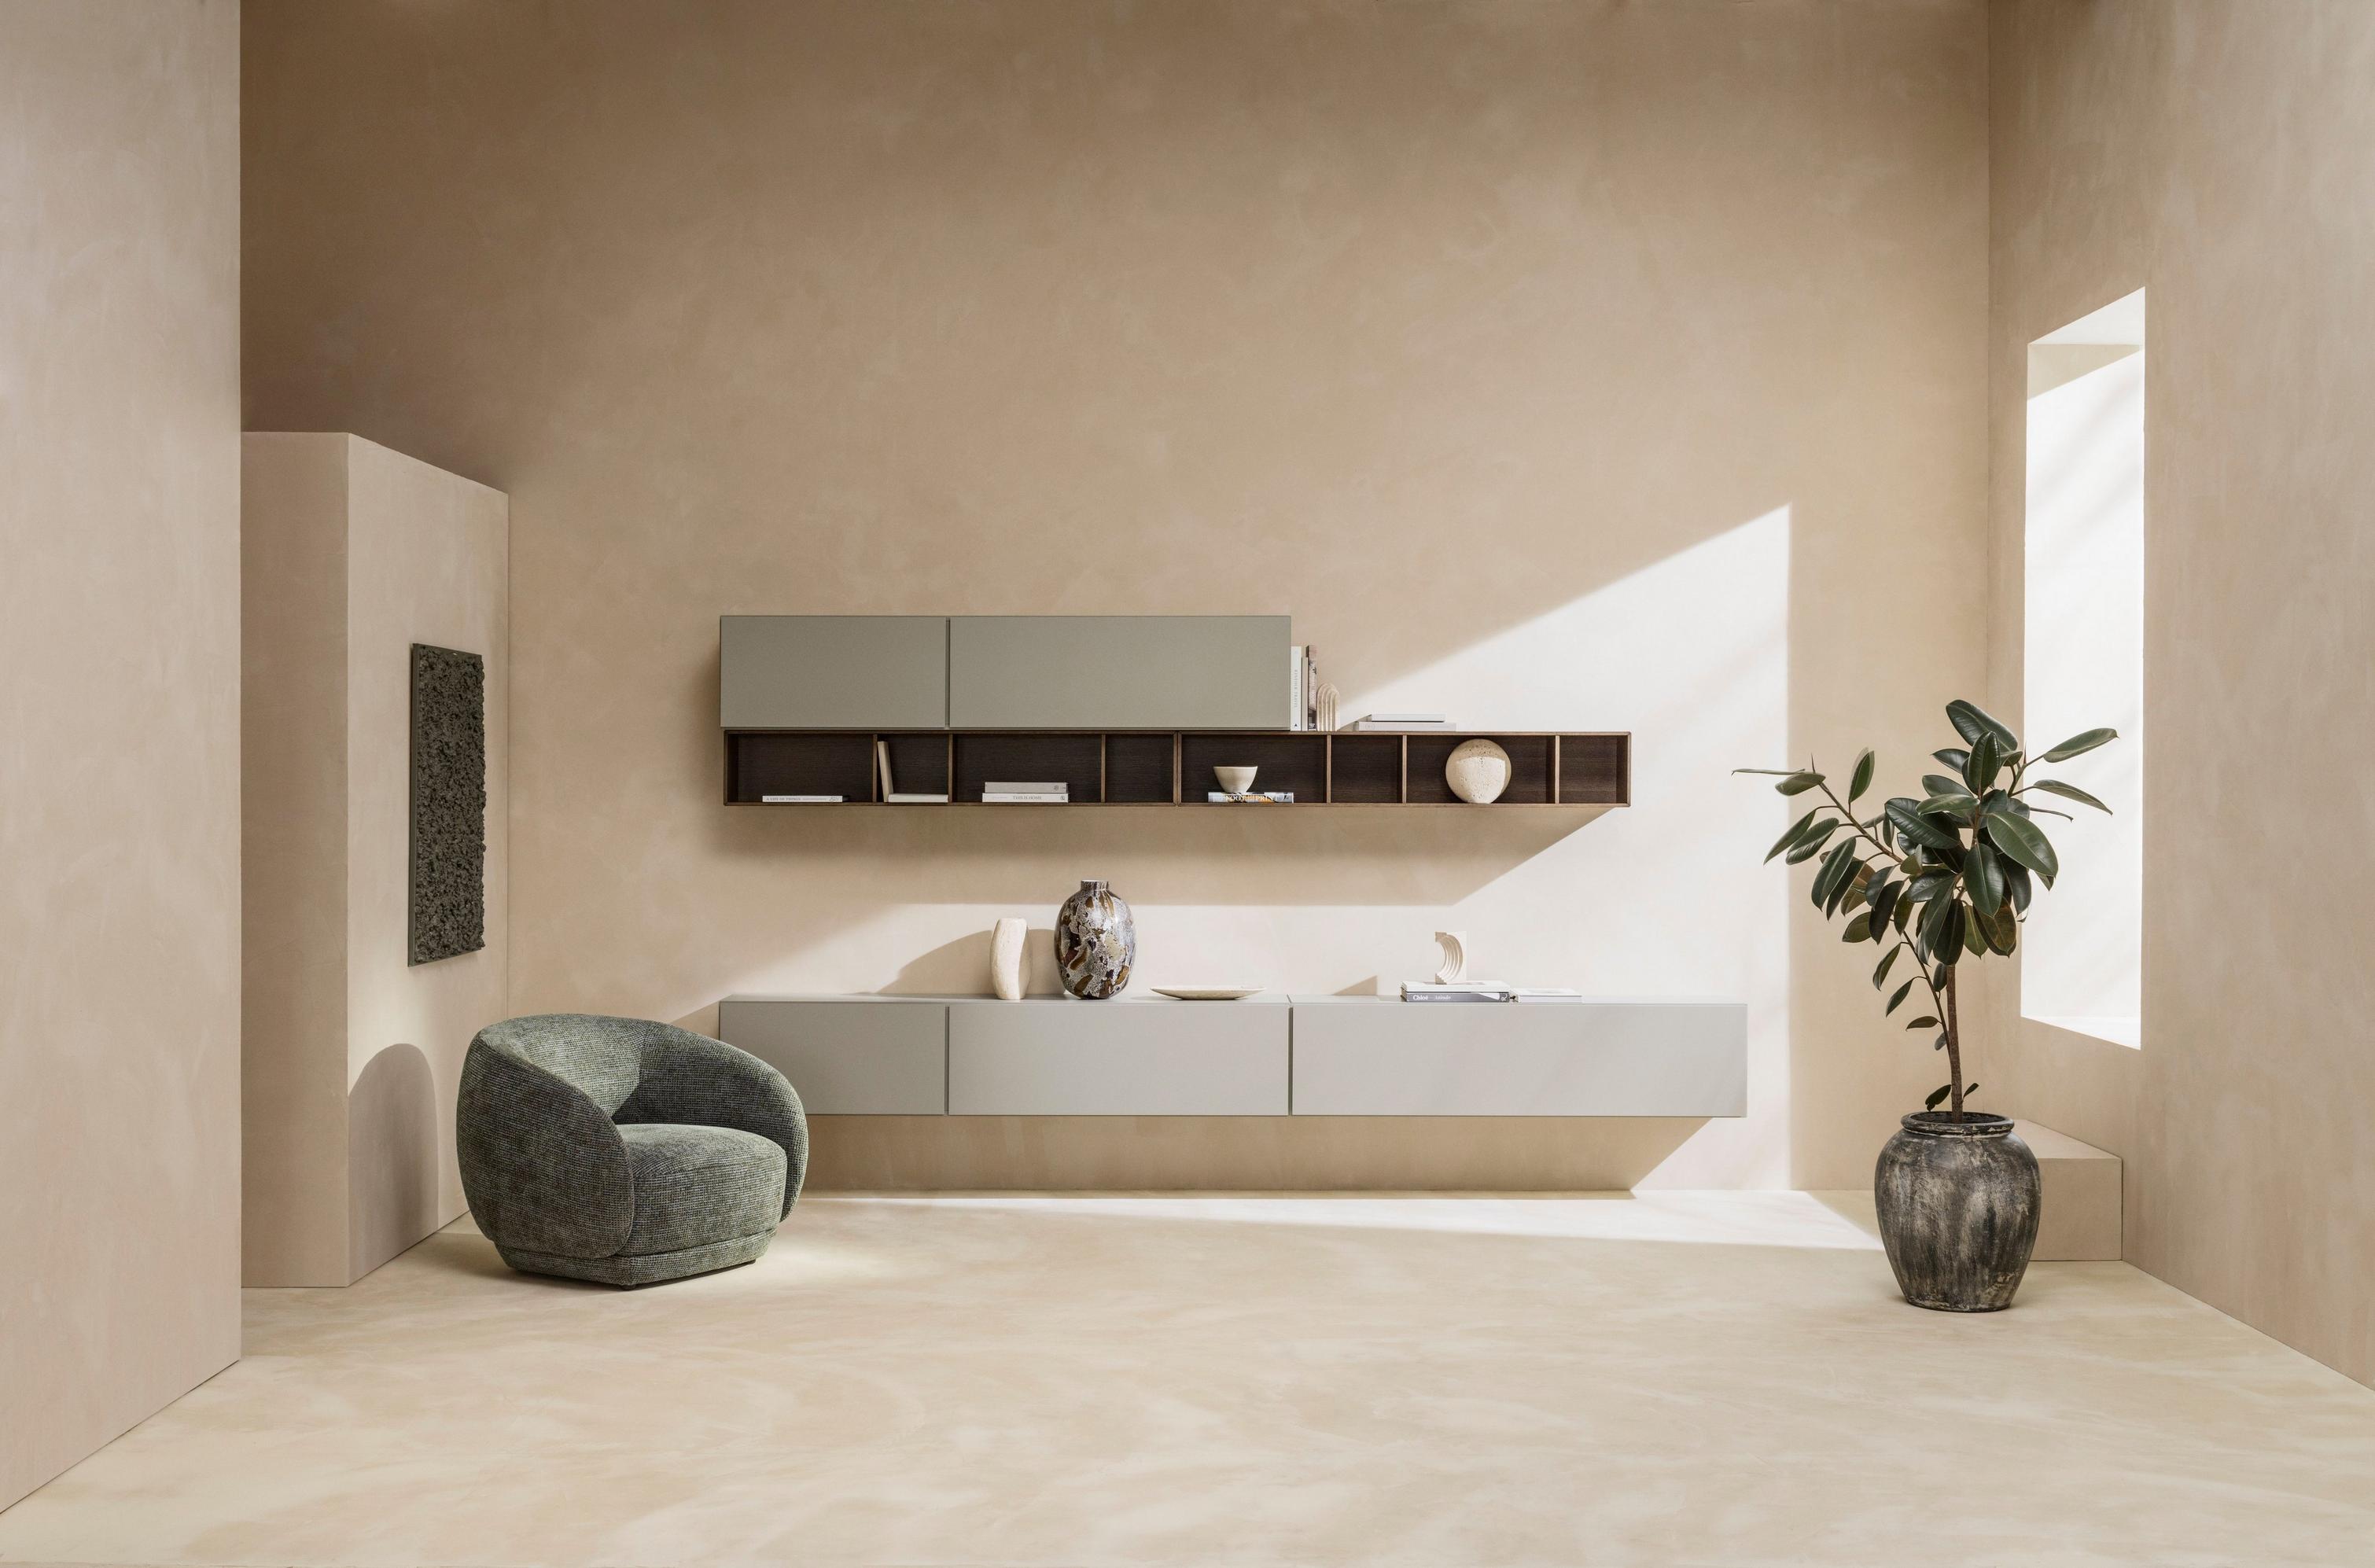 Soothing living space featuring the Bolzano swivel chair and Lugano storage.